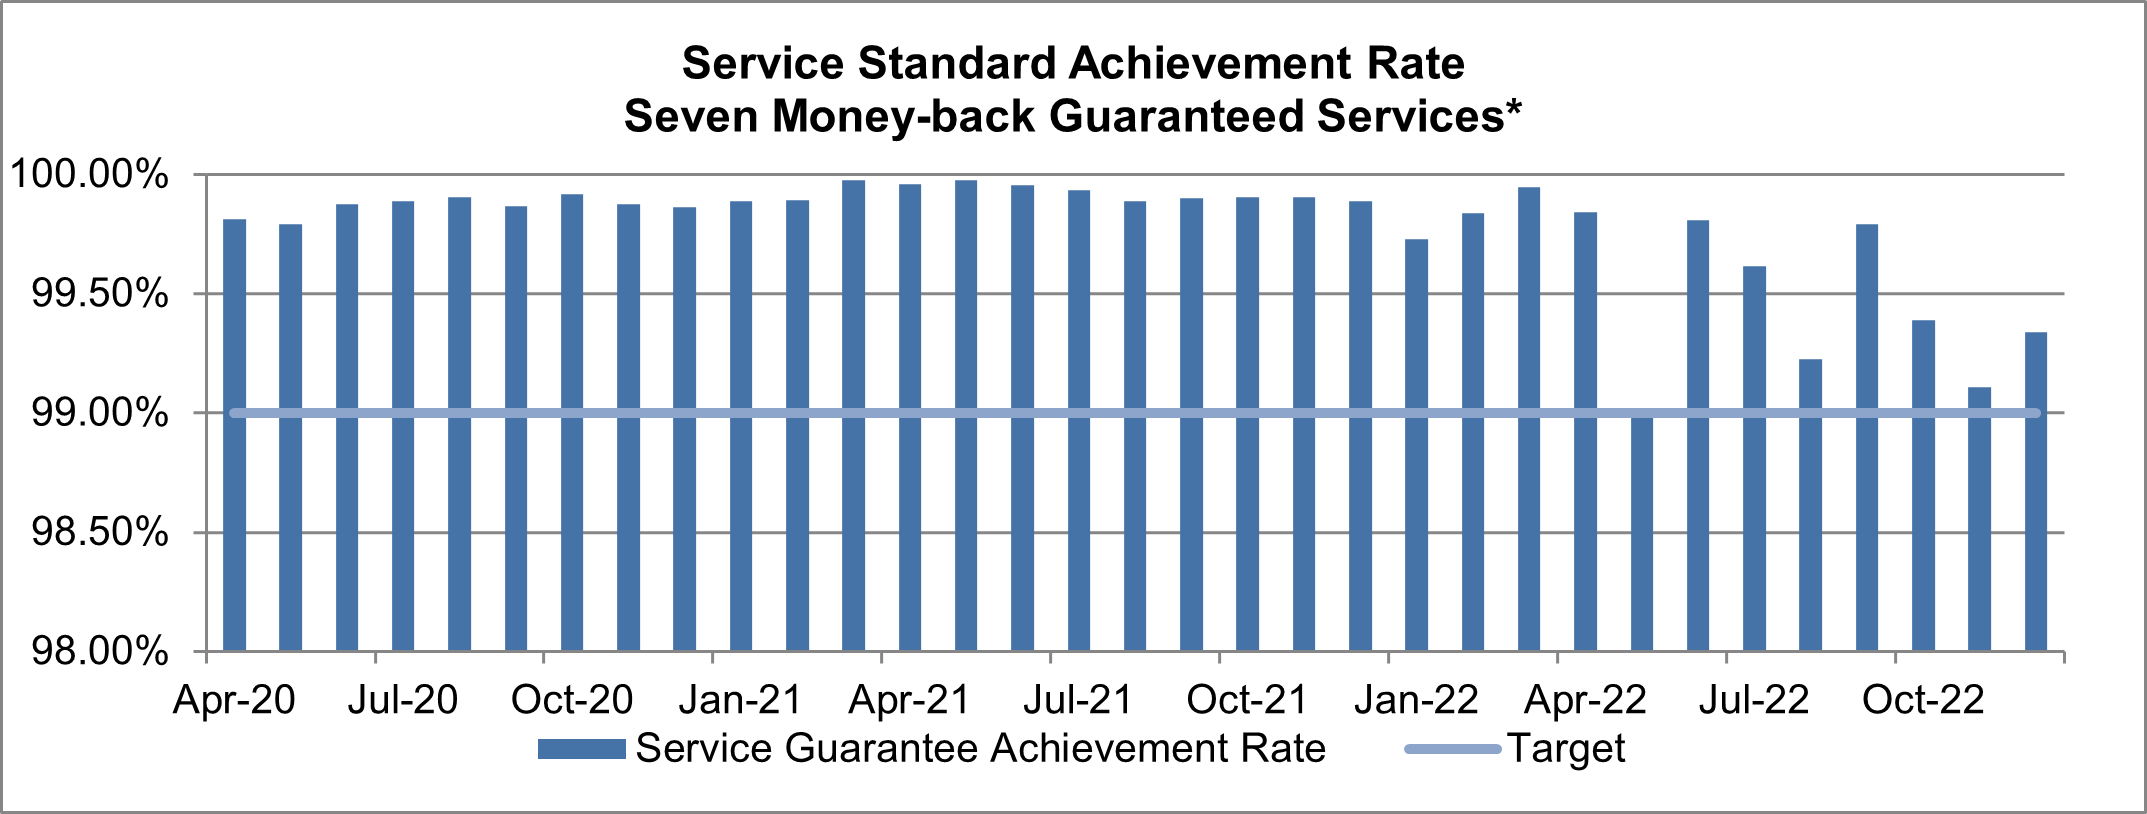 Image of bar graph depicting the Service Standard Achievement Rate